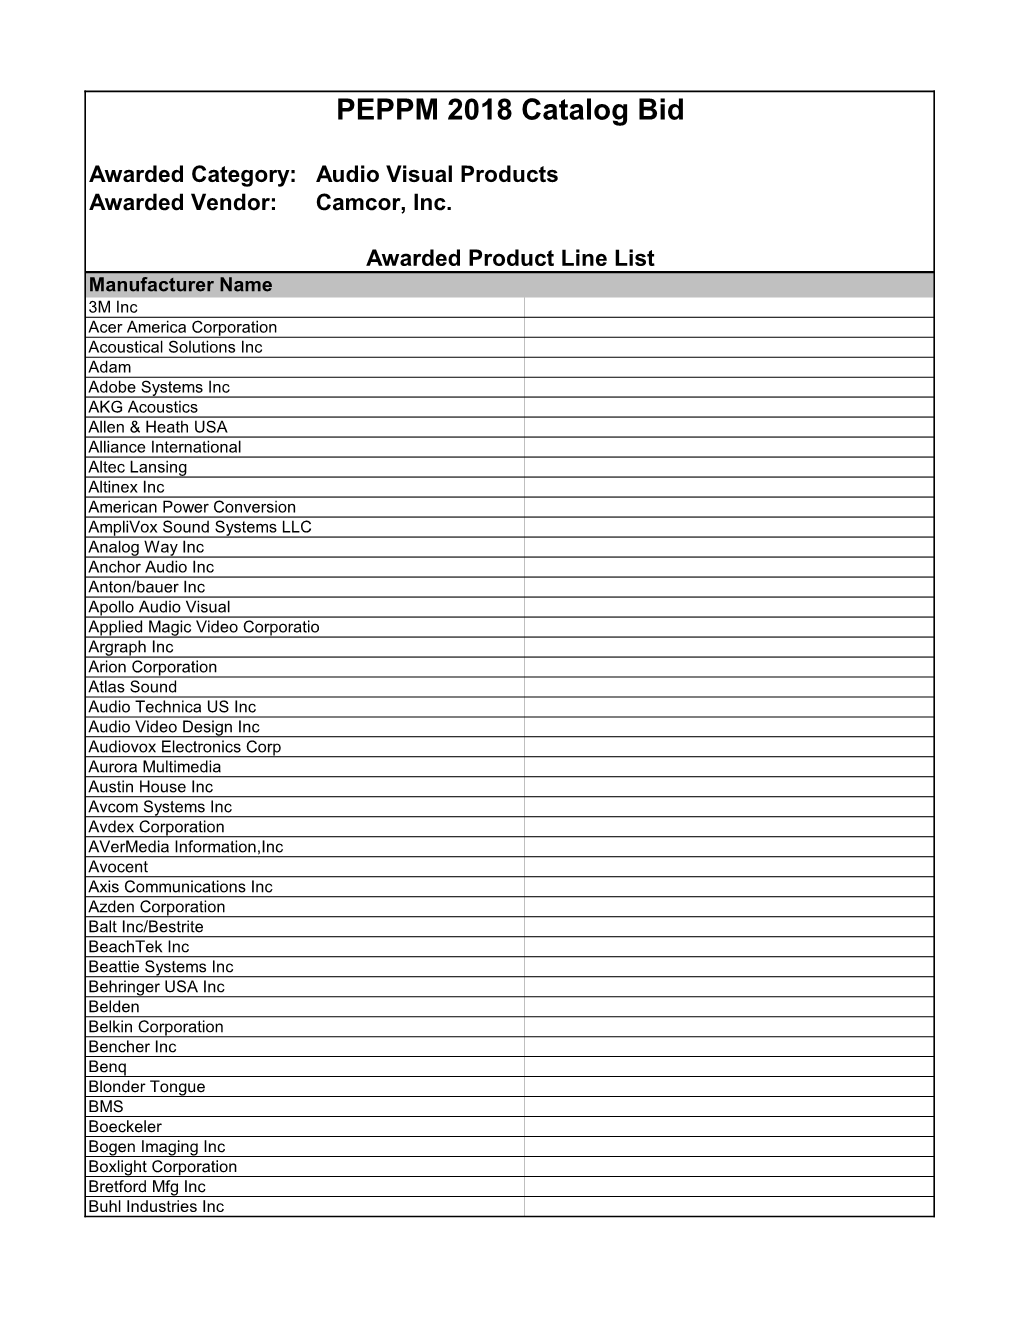 Approved Product Line List